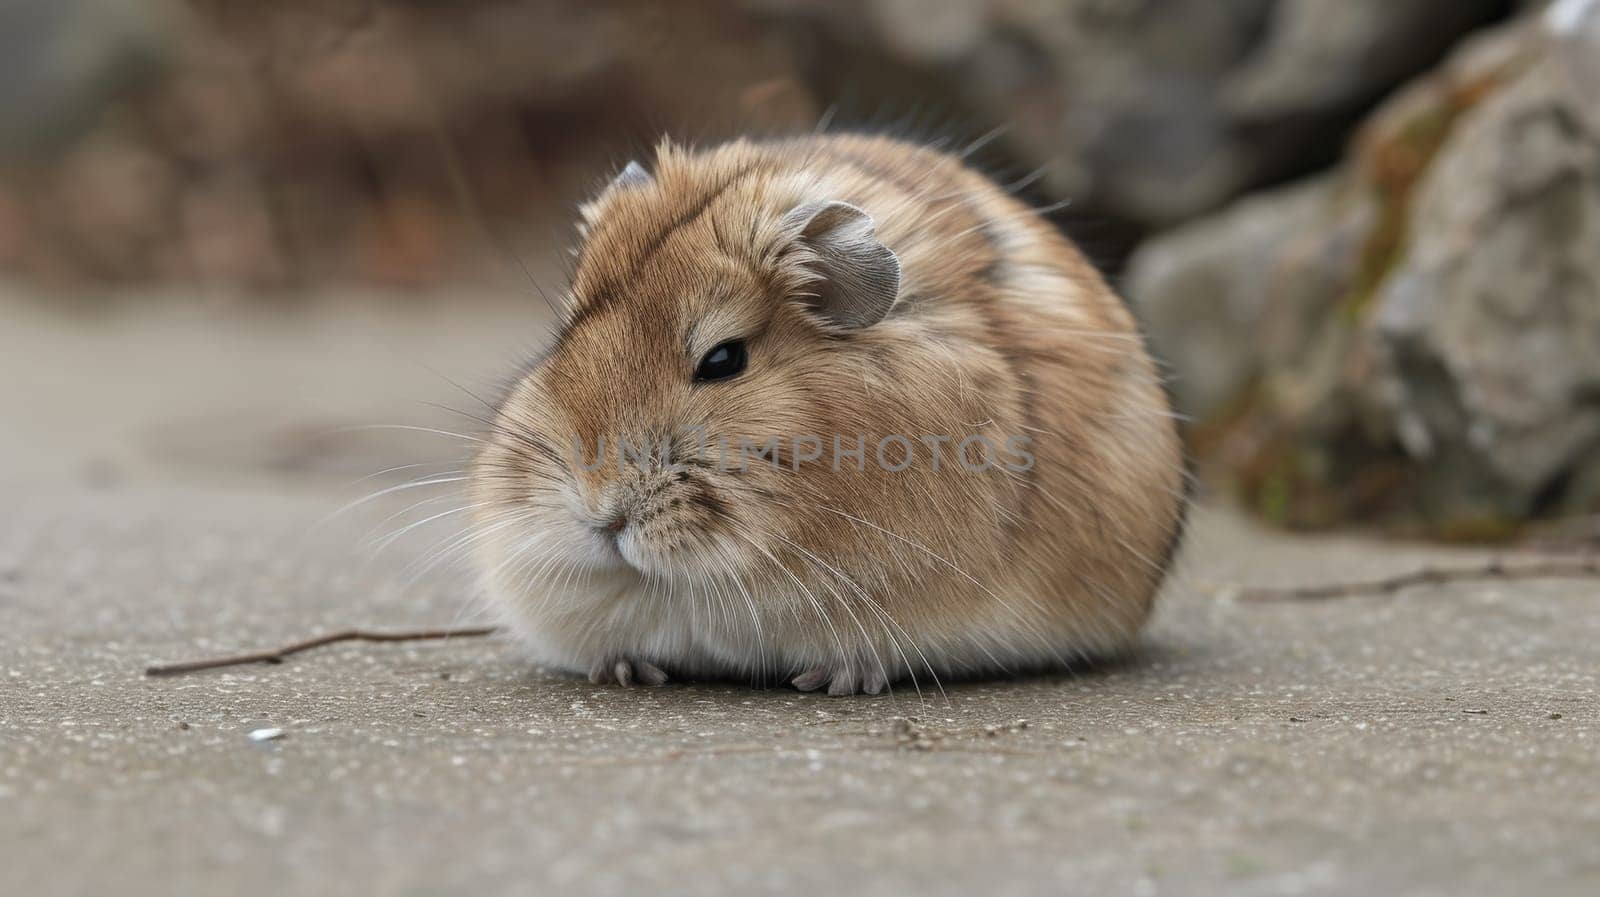 A brown and white hamster sitting on the ground next to a rock